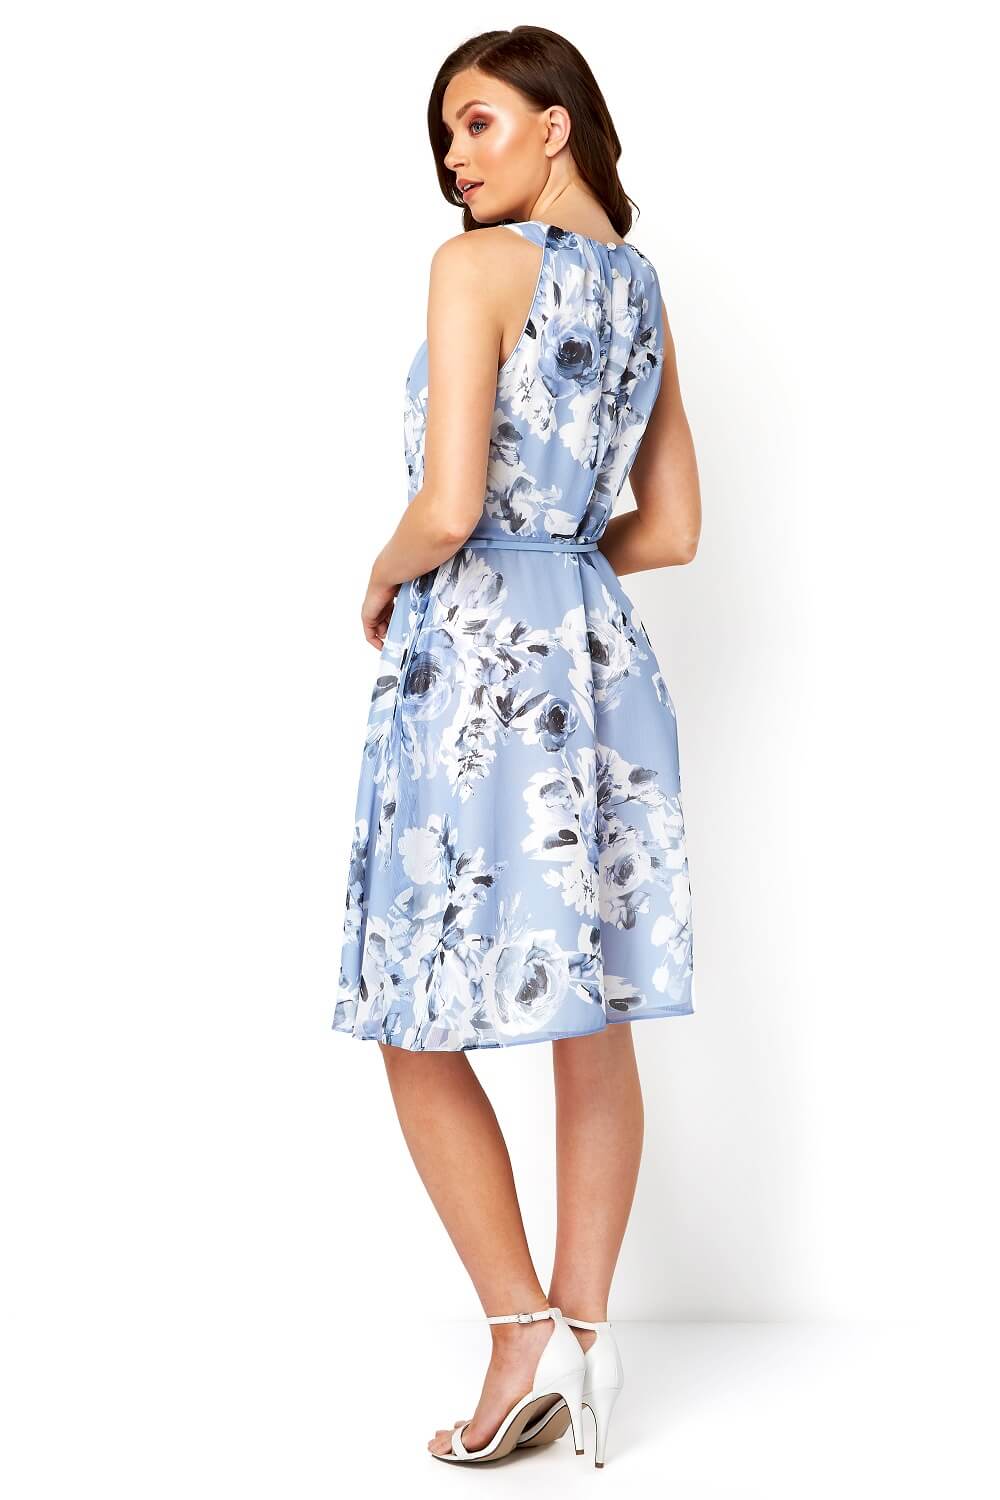 Blue Floral Fit and Flare Dress with Belt, Image 3 of 4